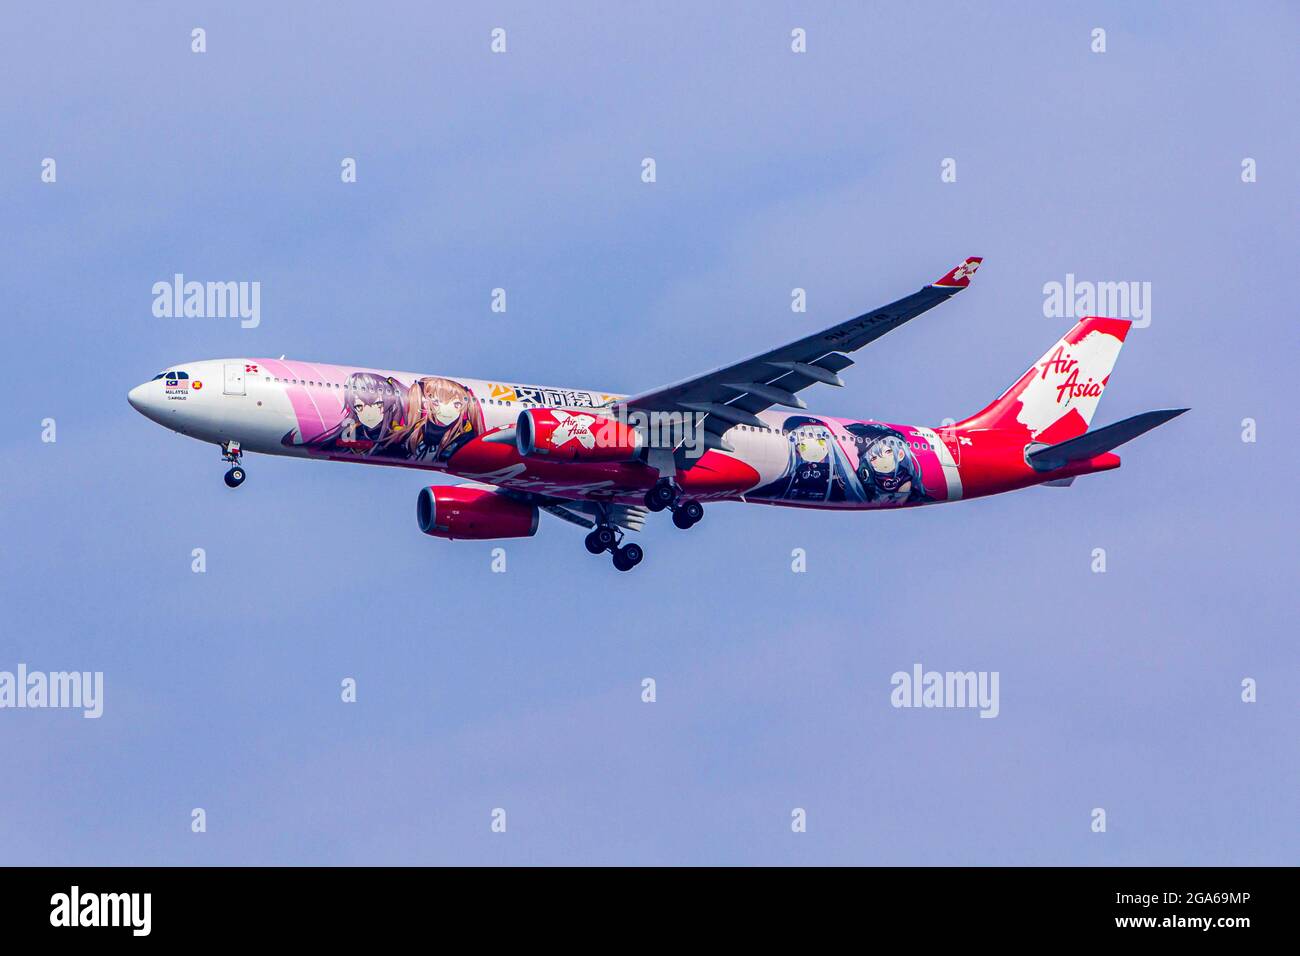 SEPANG, MALAYSIA - FEBRUARY 08, 2019, Air Asia Low Cost Airlines aircraft Stock Photo